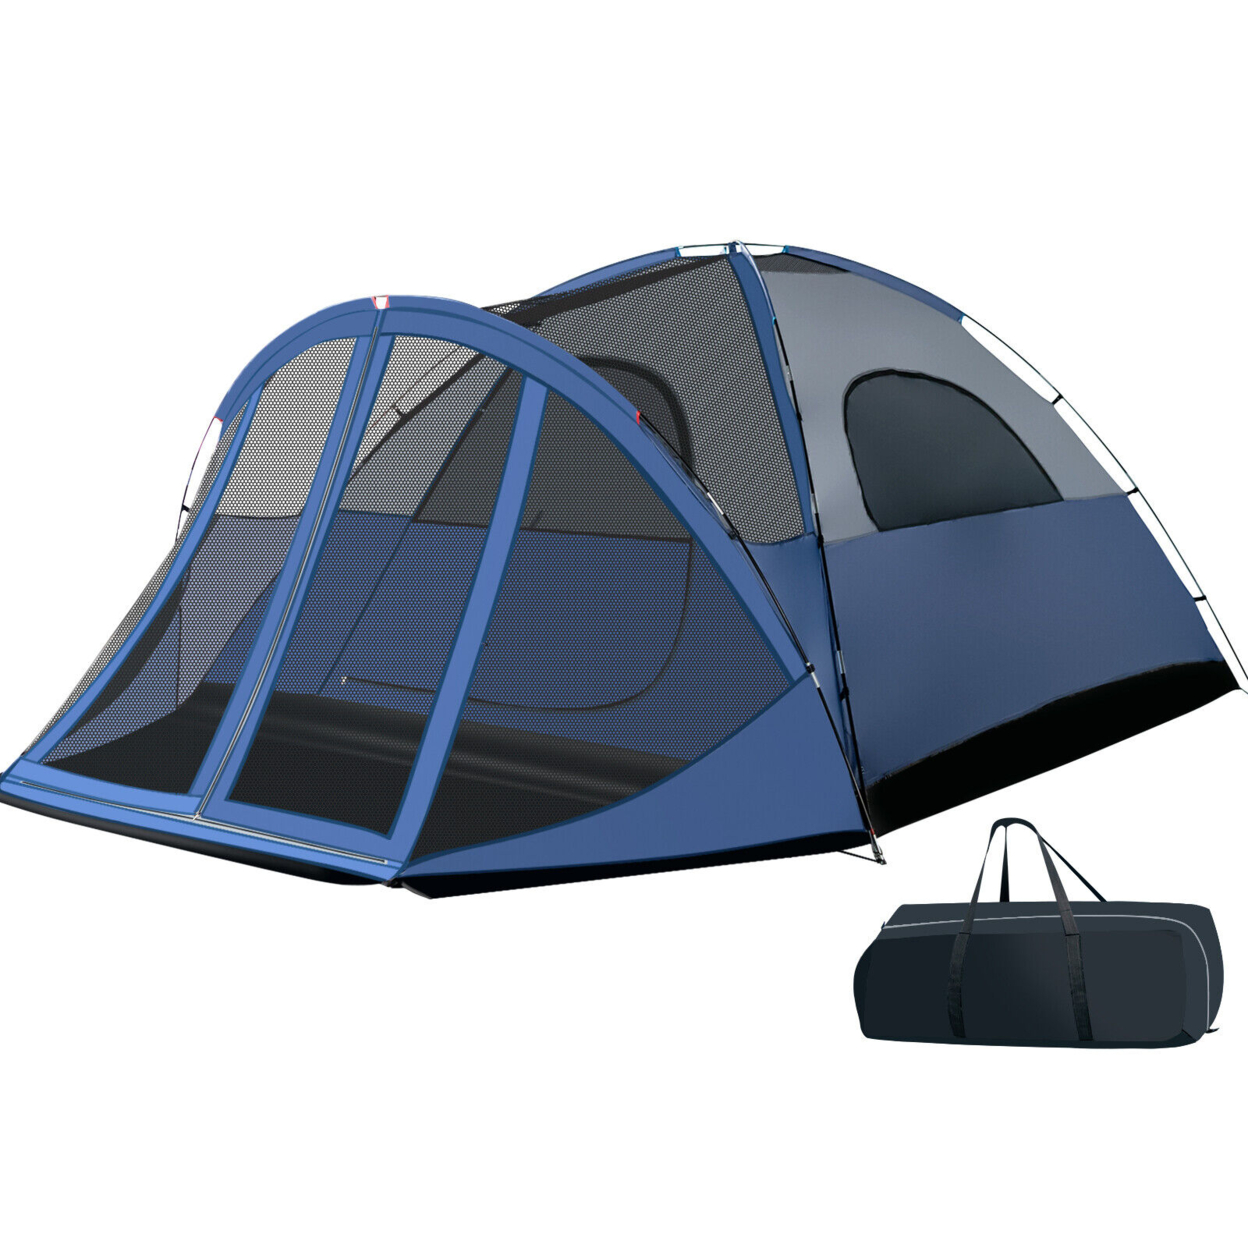 6-Person Large Family Camping Dome Tent W/ Screen Room Porch & Removable Rainfly